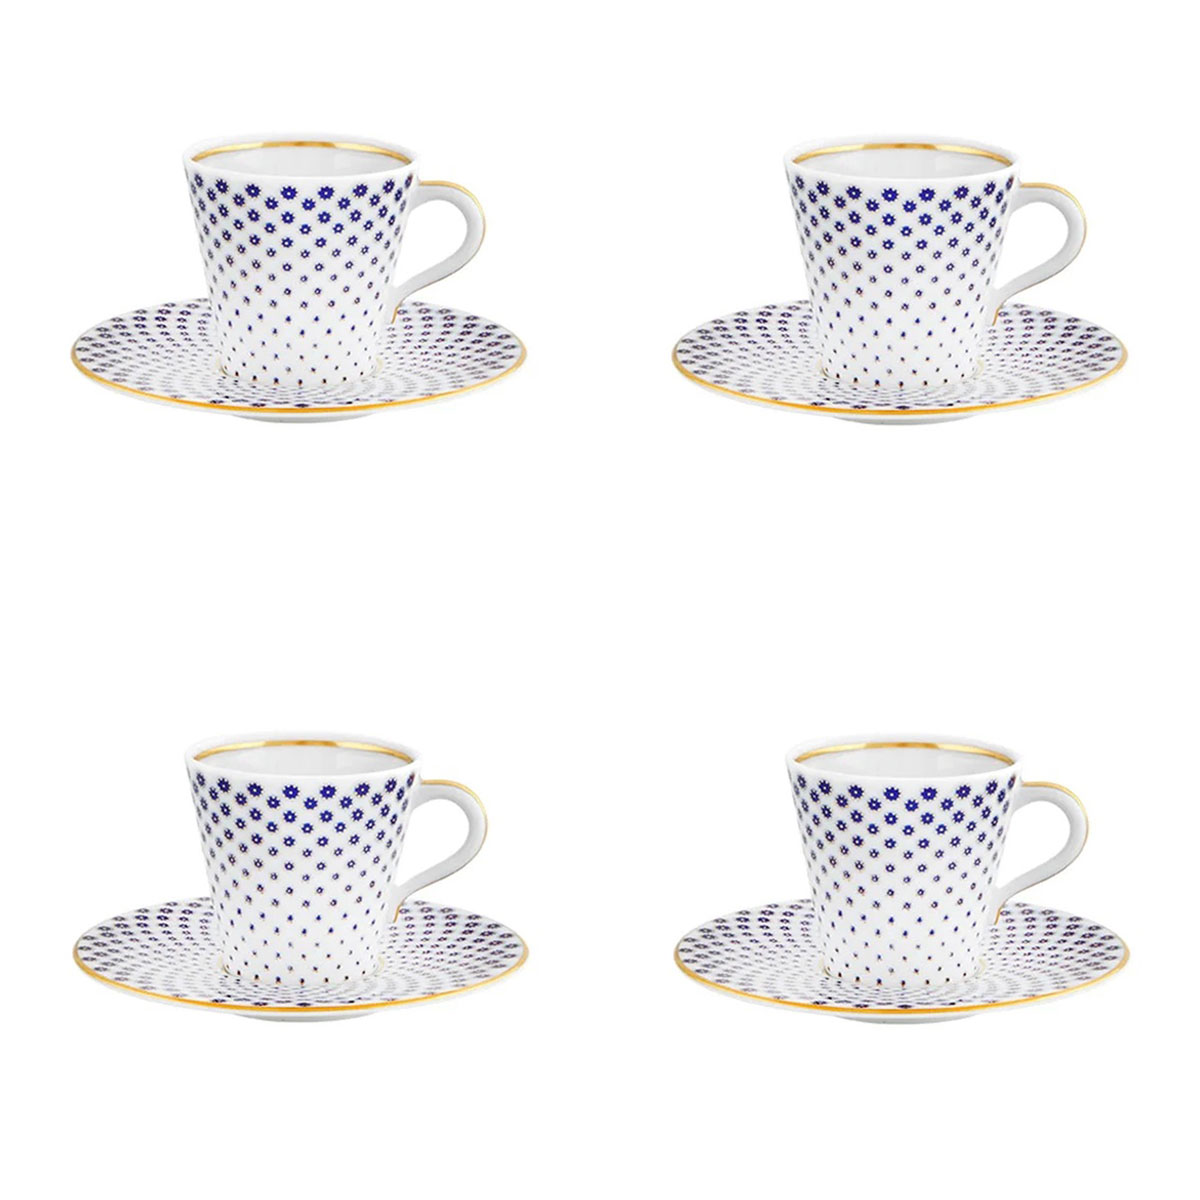 Vista Alegre Porcelain Constellation D'Or Coffee Cup and Saucer, Set of 4